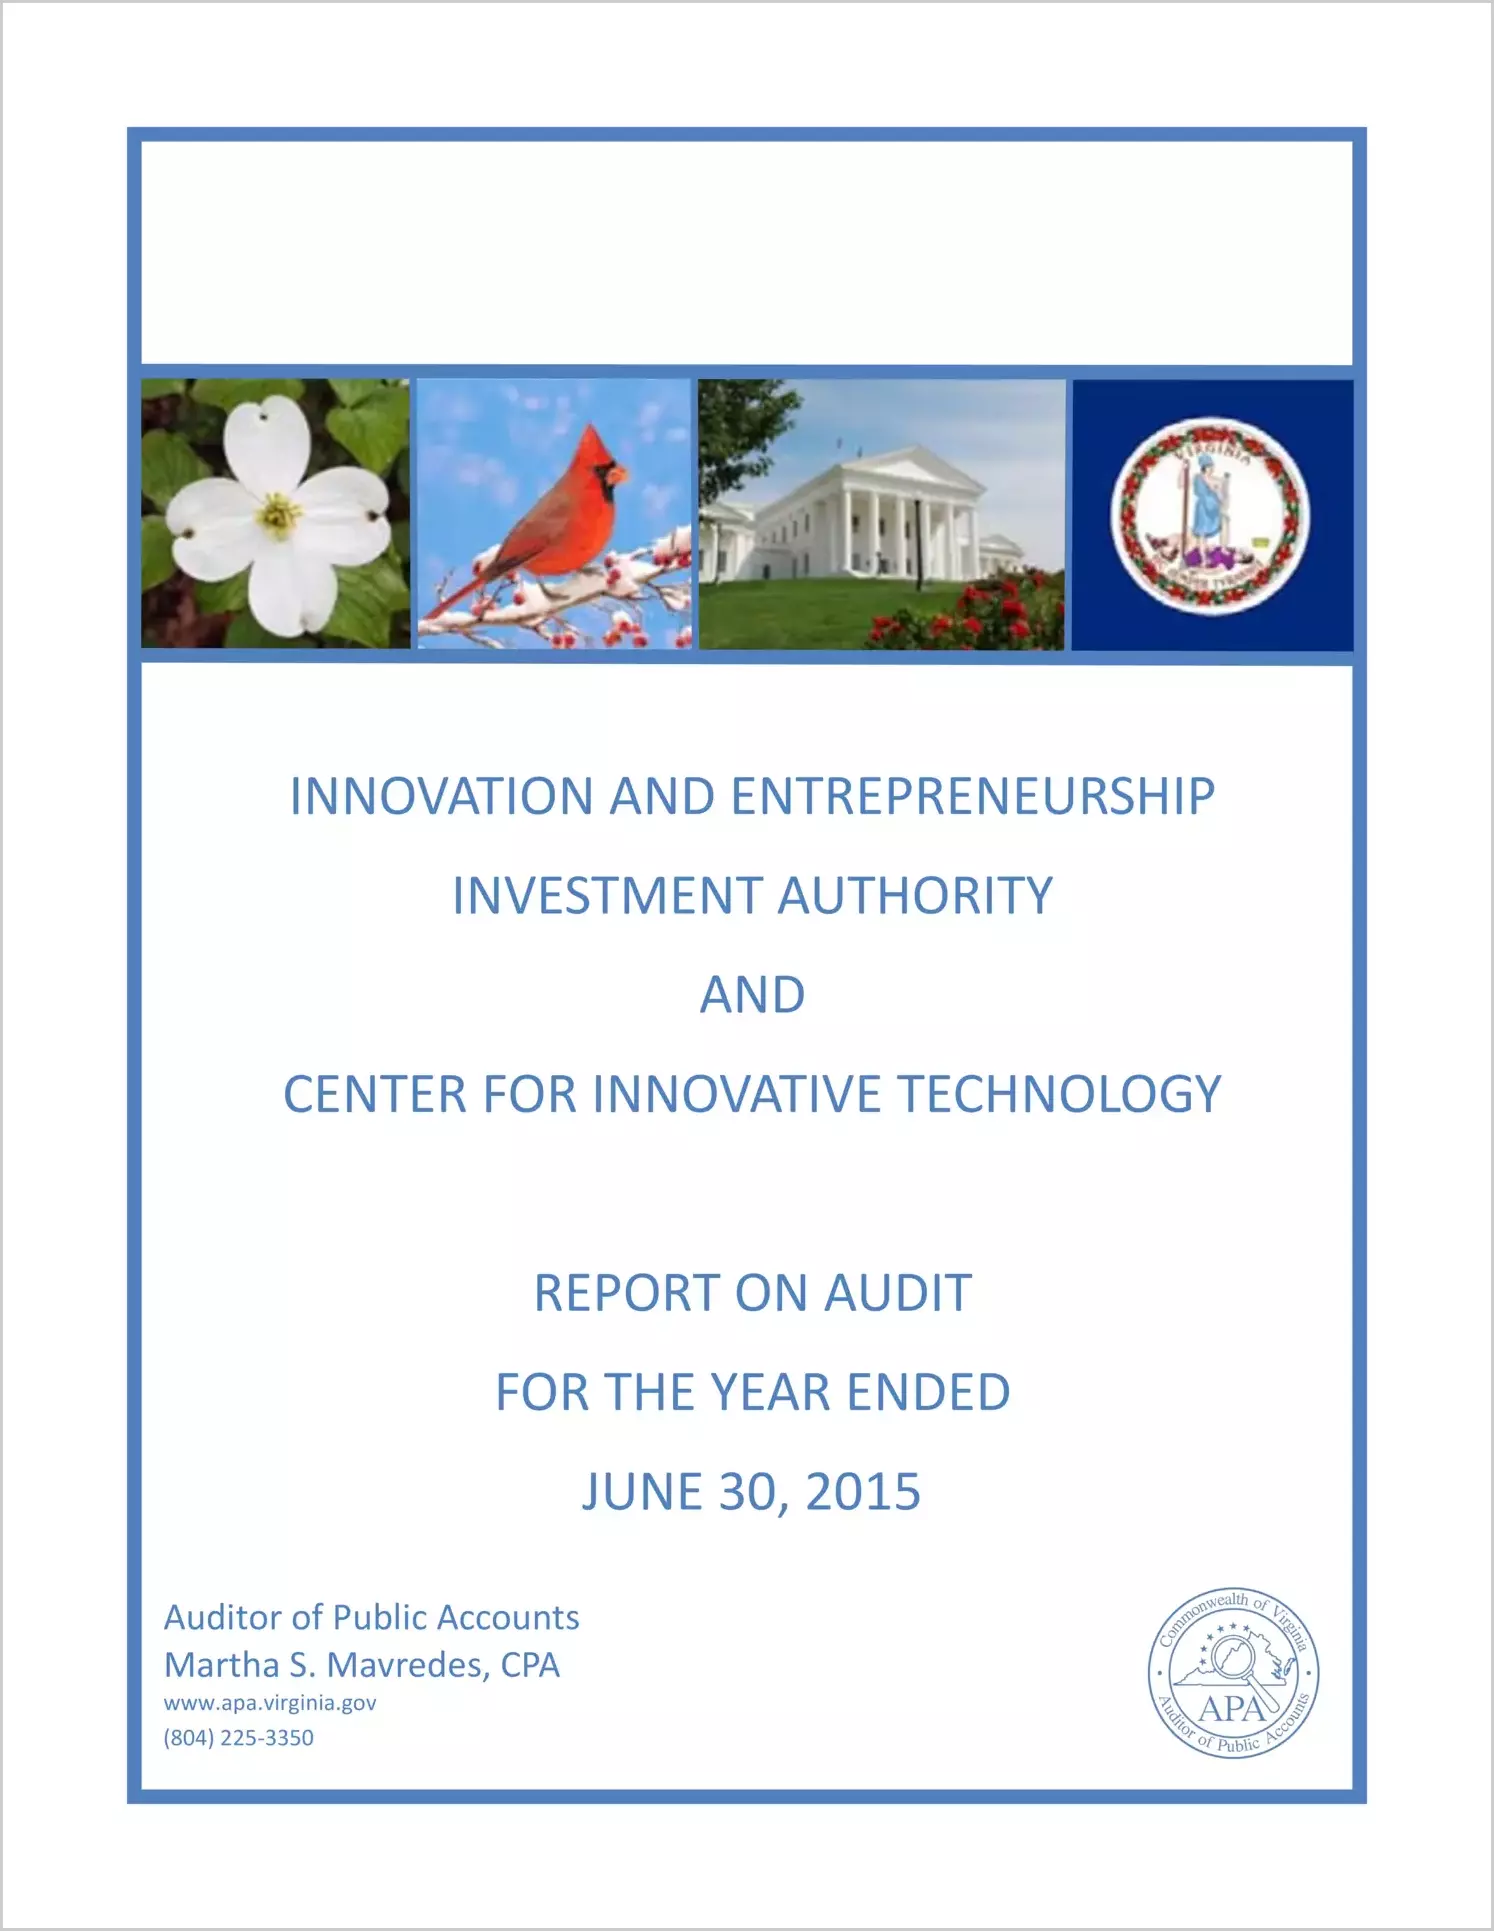 Innovation and Entrepreneurship Investment Authority and Center for Innovative Technology report on audit for the year ended June 30, 2015